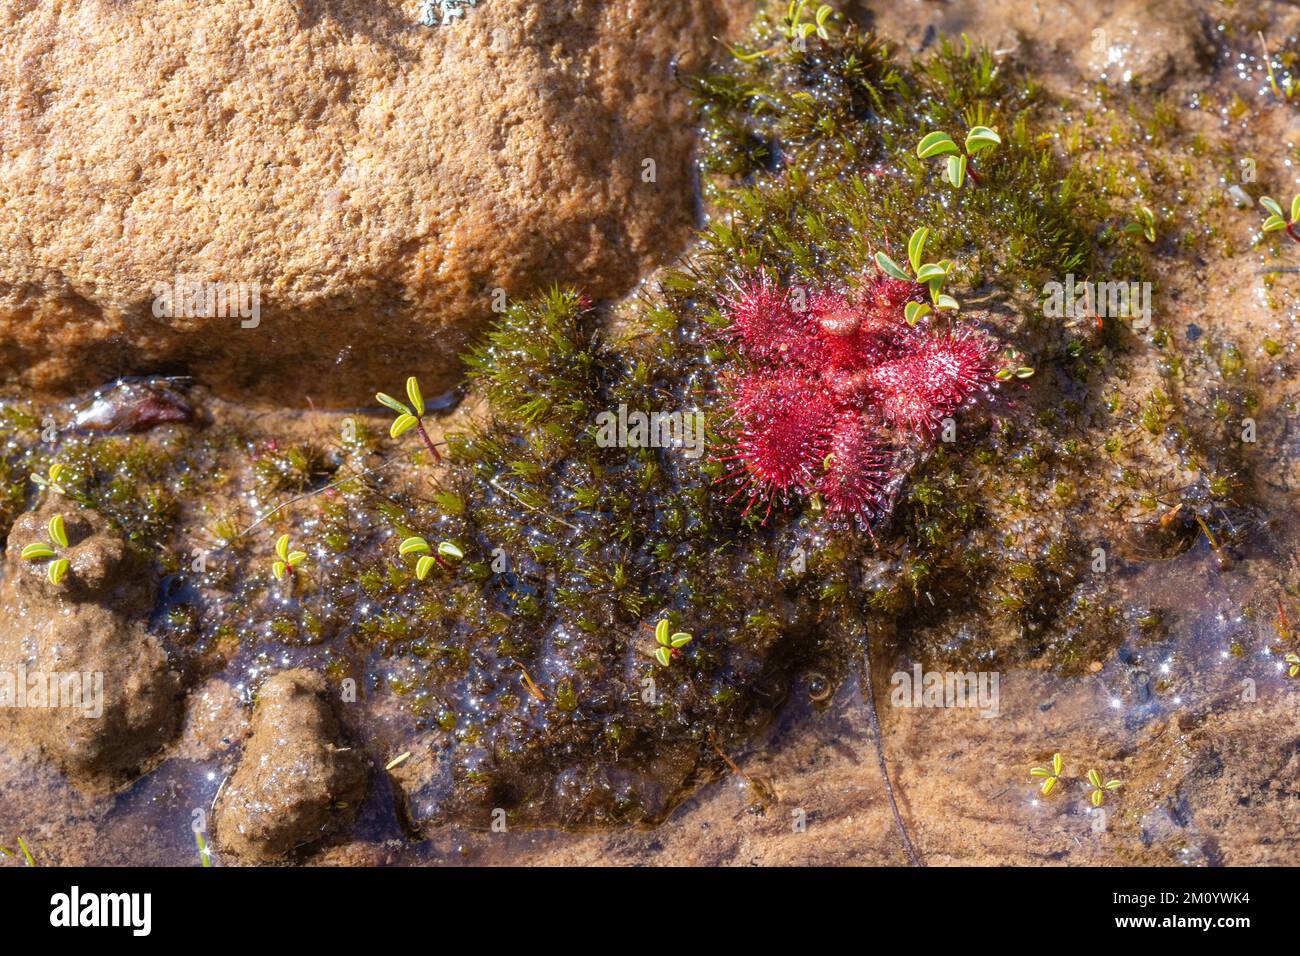 Carnivorous Plants: The sundew Drosera trinervia in the Cederberg Mountains in South Africa Stock Photo